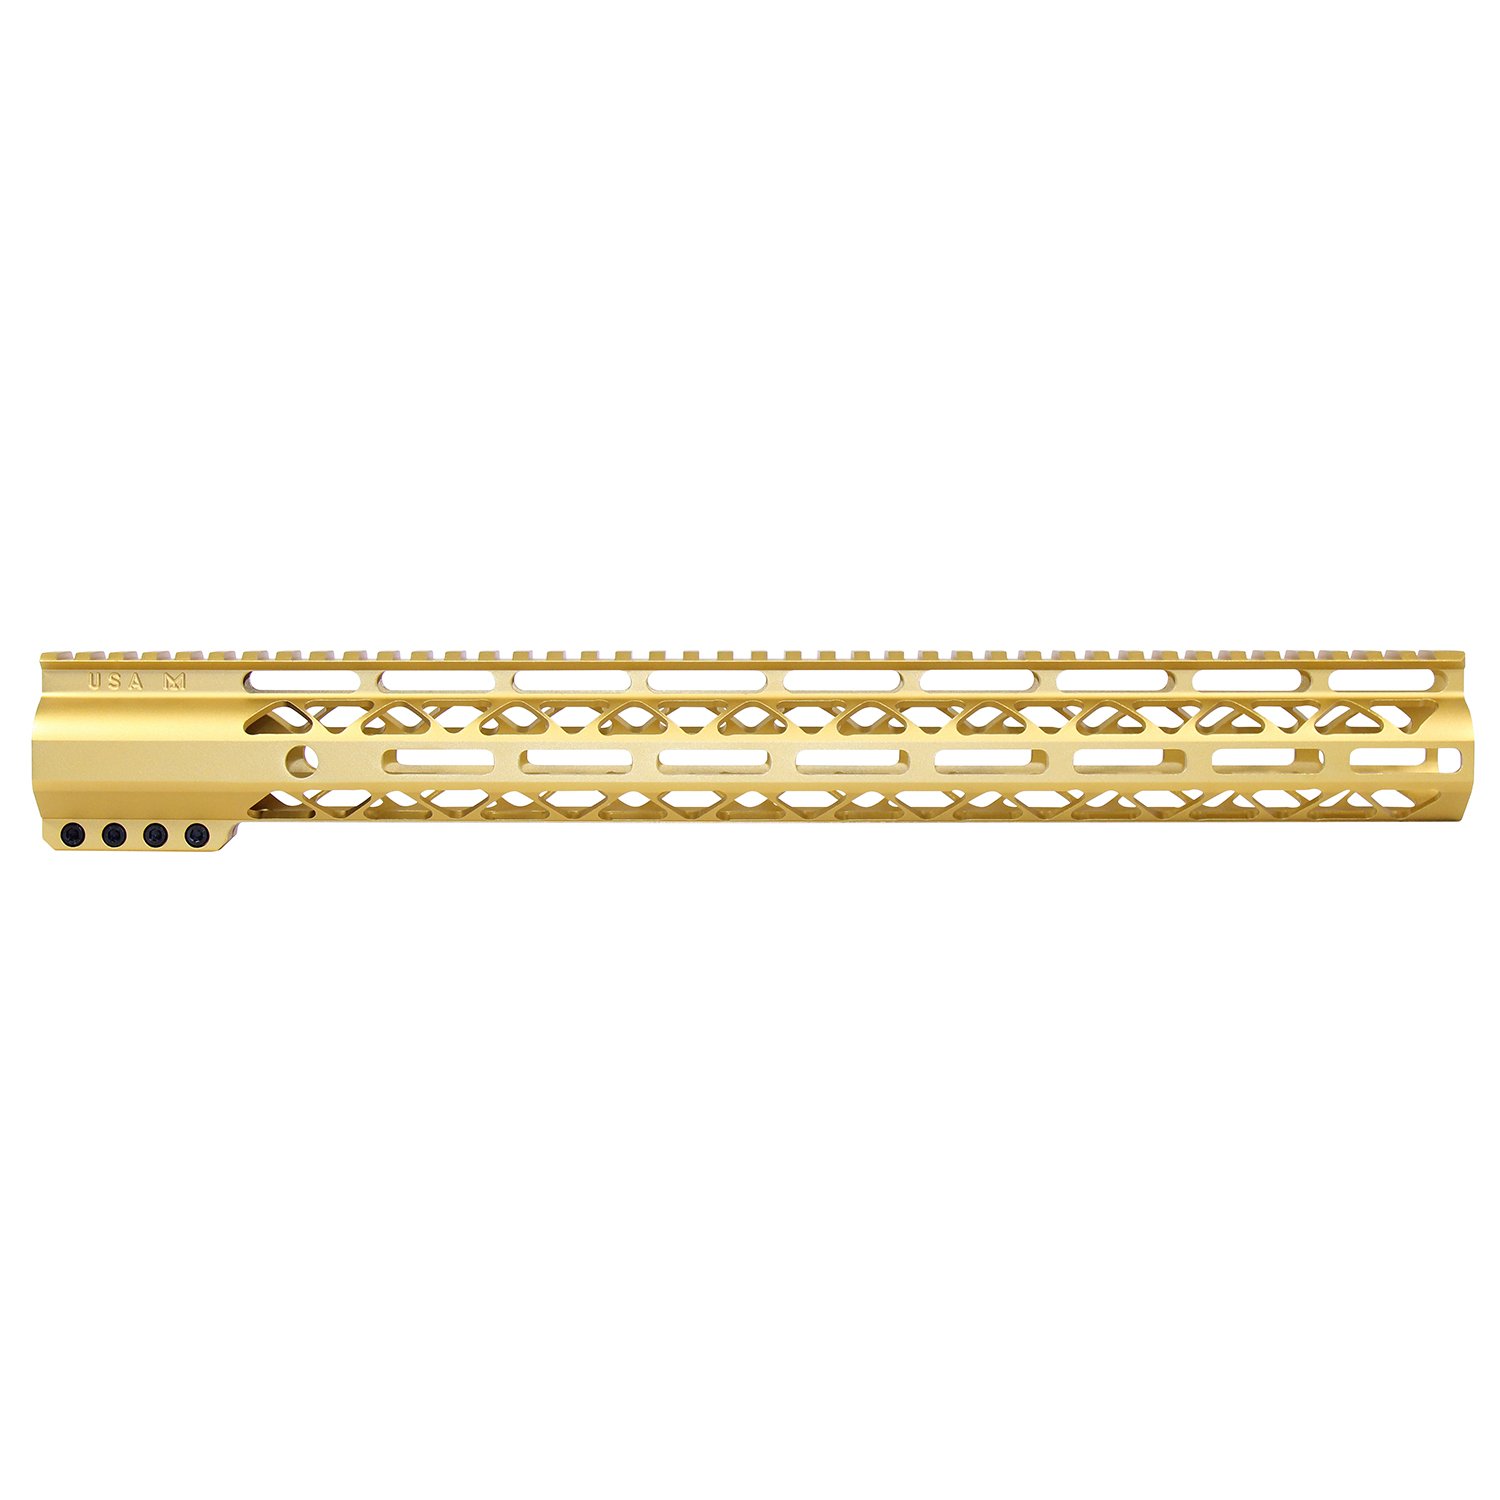 16.5" AIR-LOK Series M-LOK Compression Free Floating Handguard With Monolithic Top Rail (Anodized Gold)